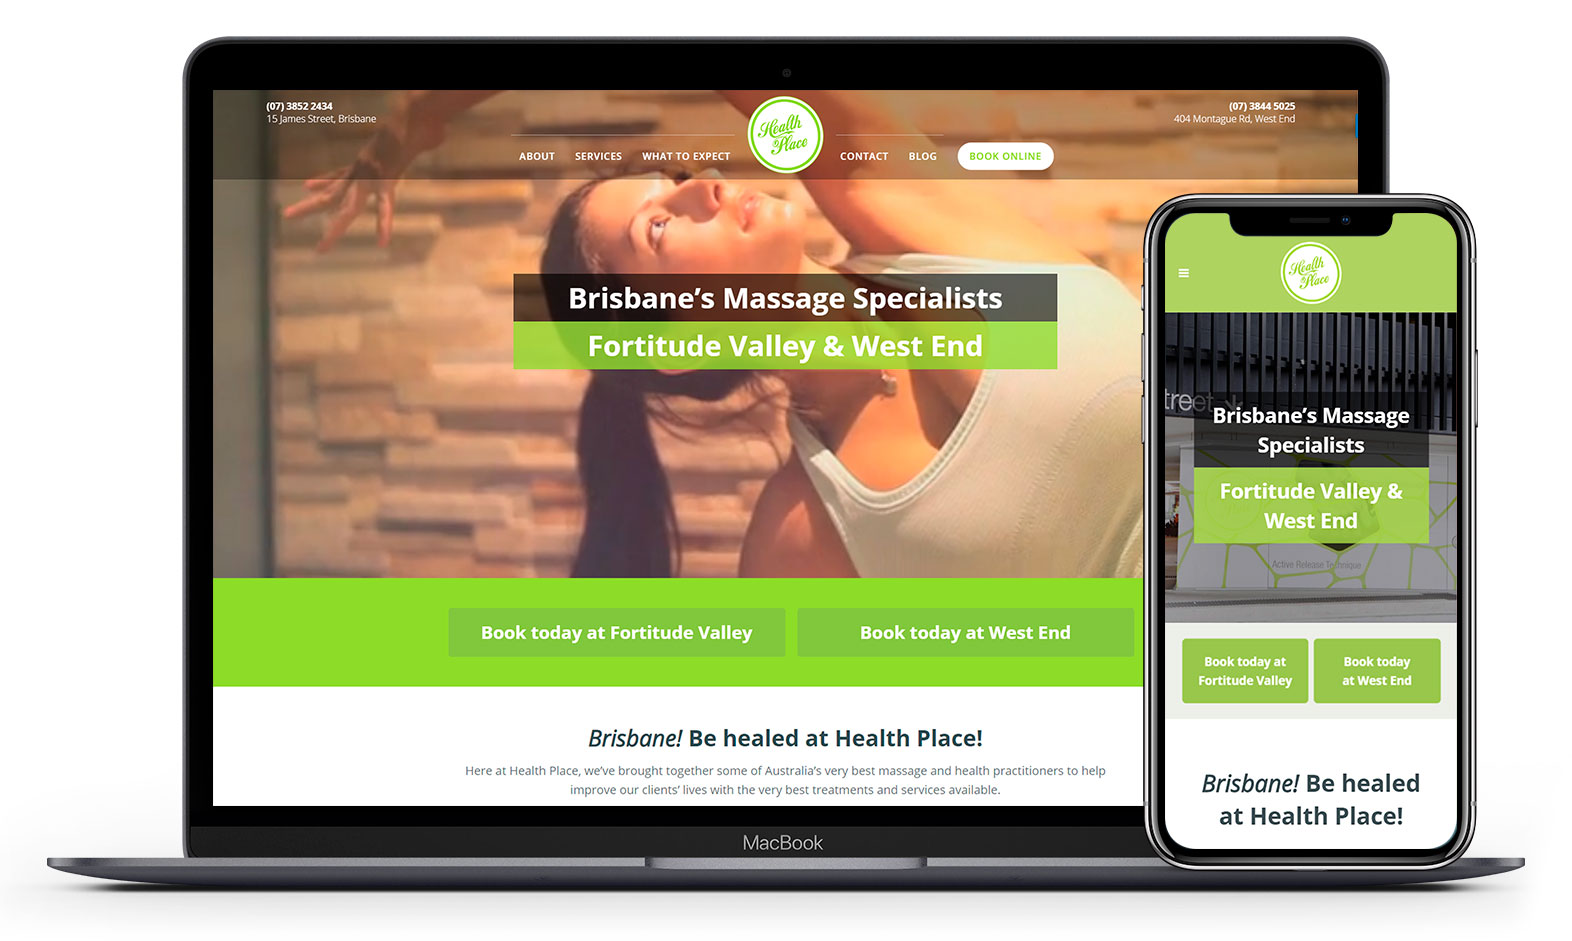 Health place's website design displayed responsive devices